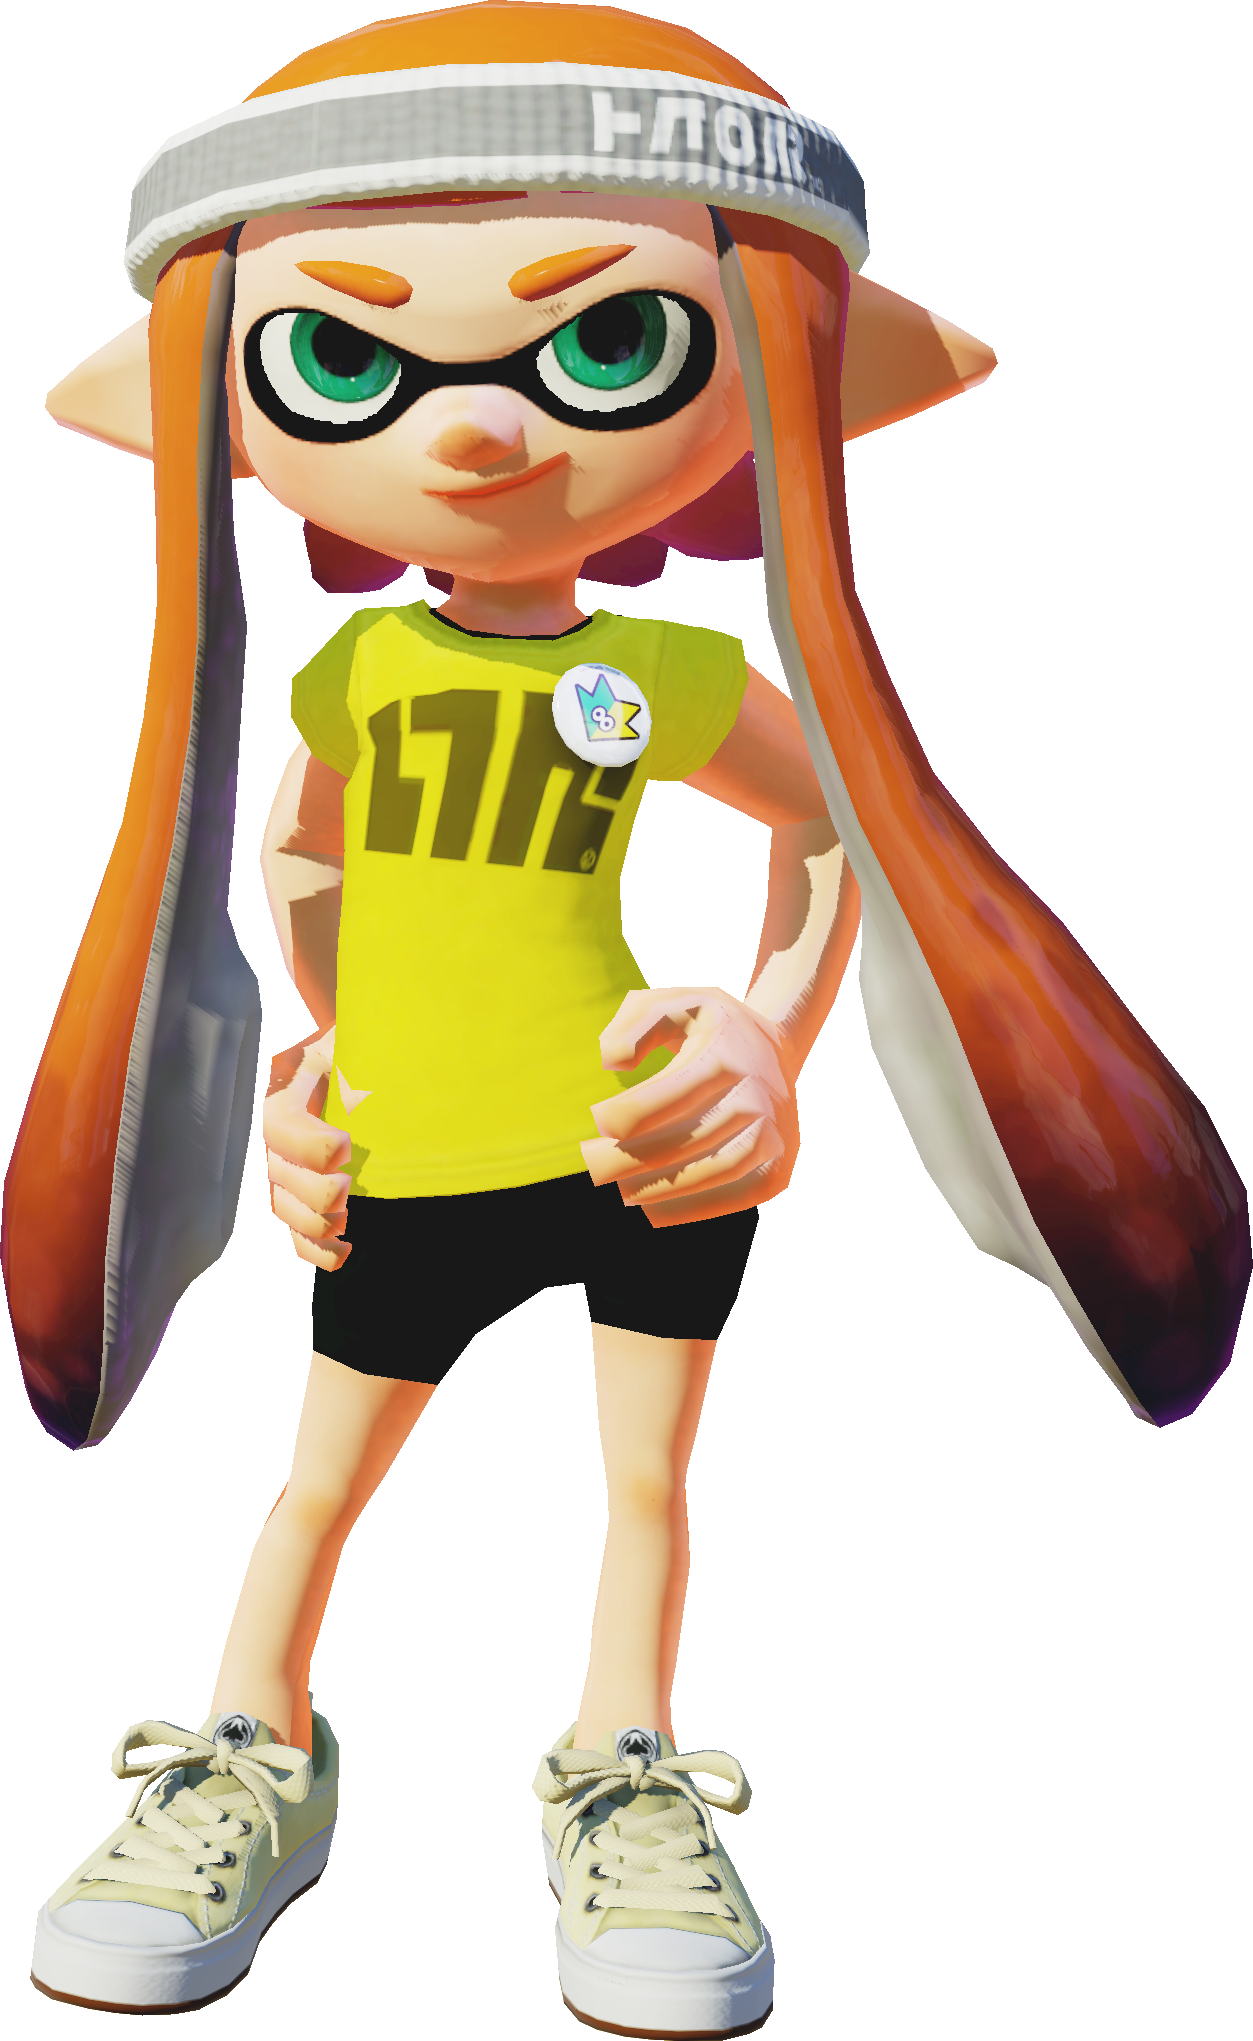 inkling mouth